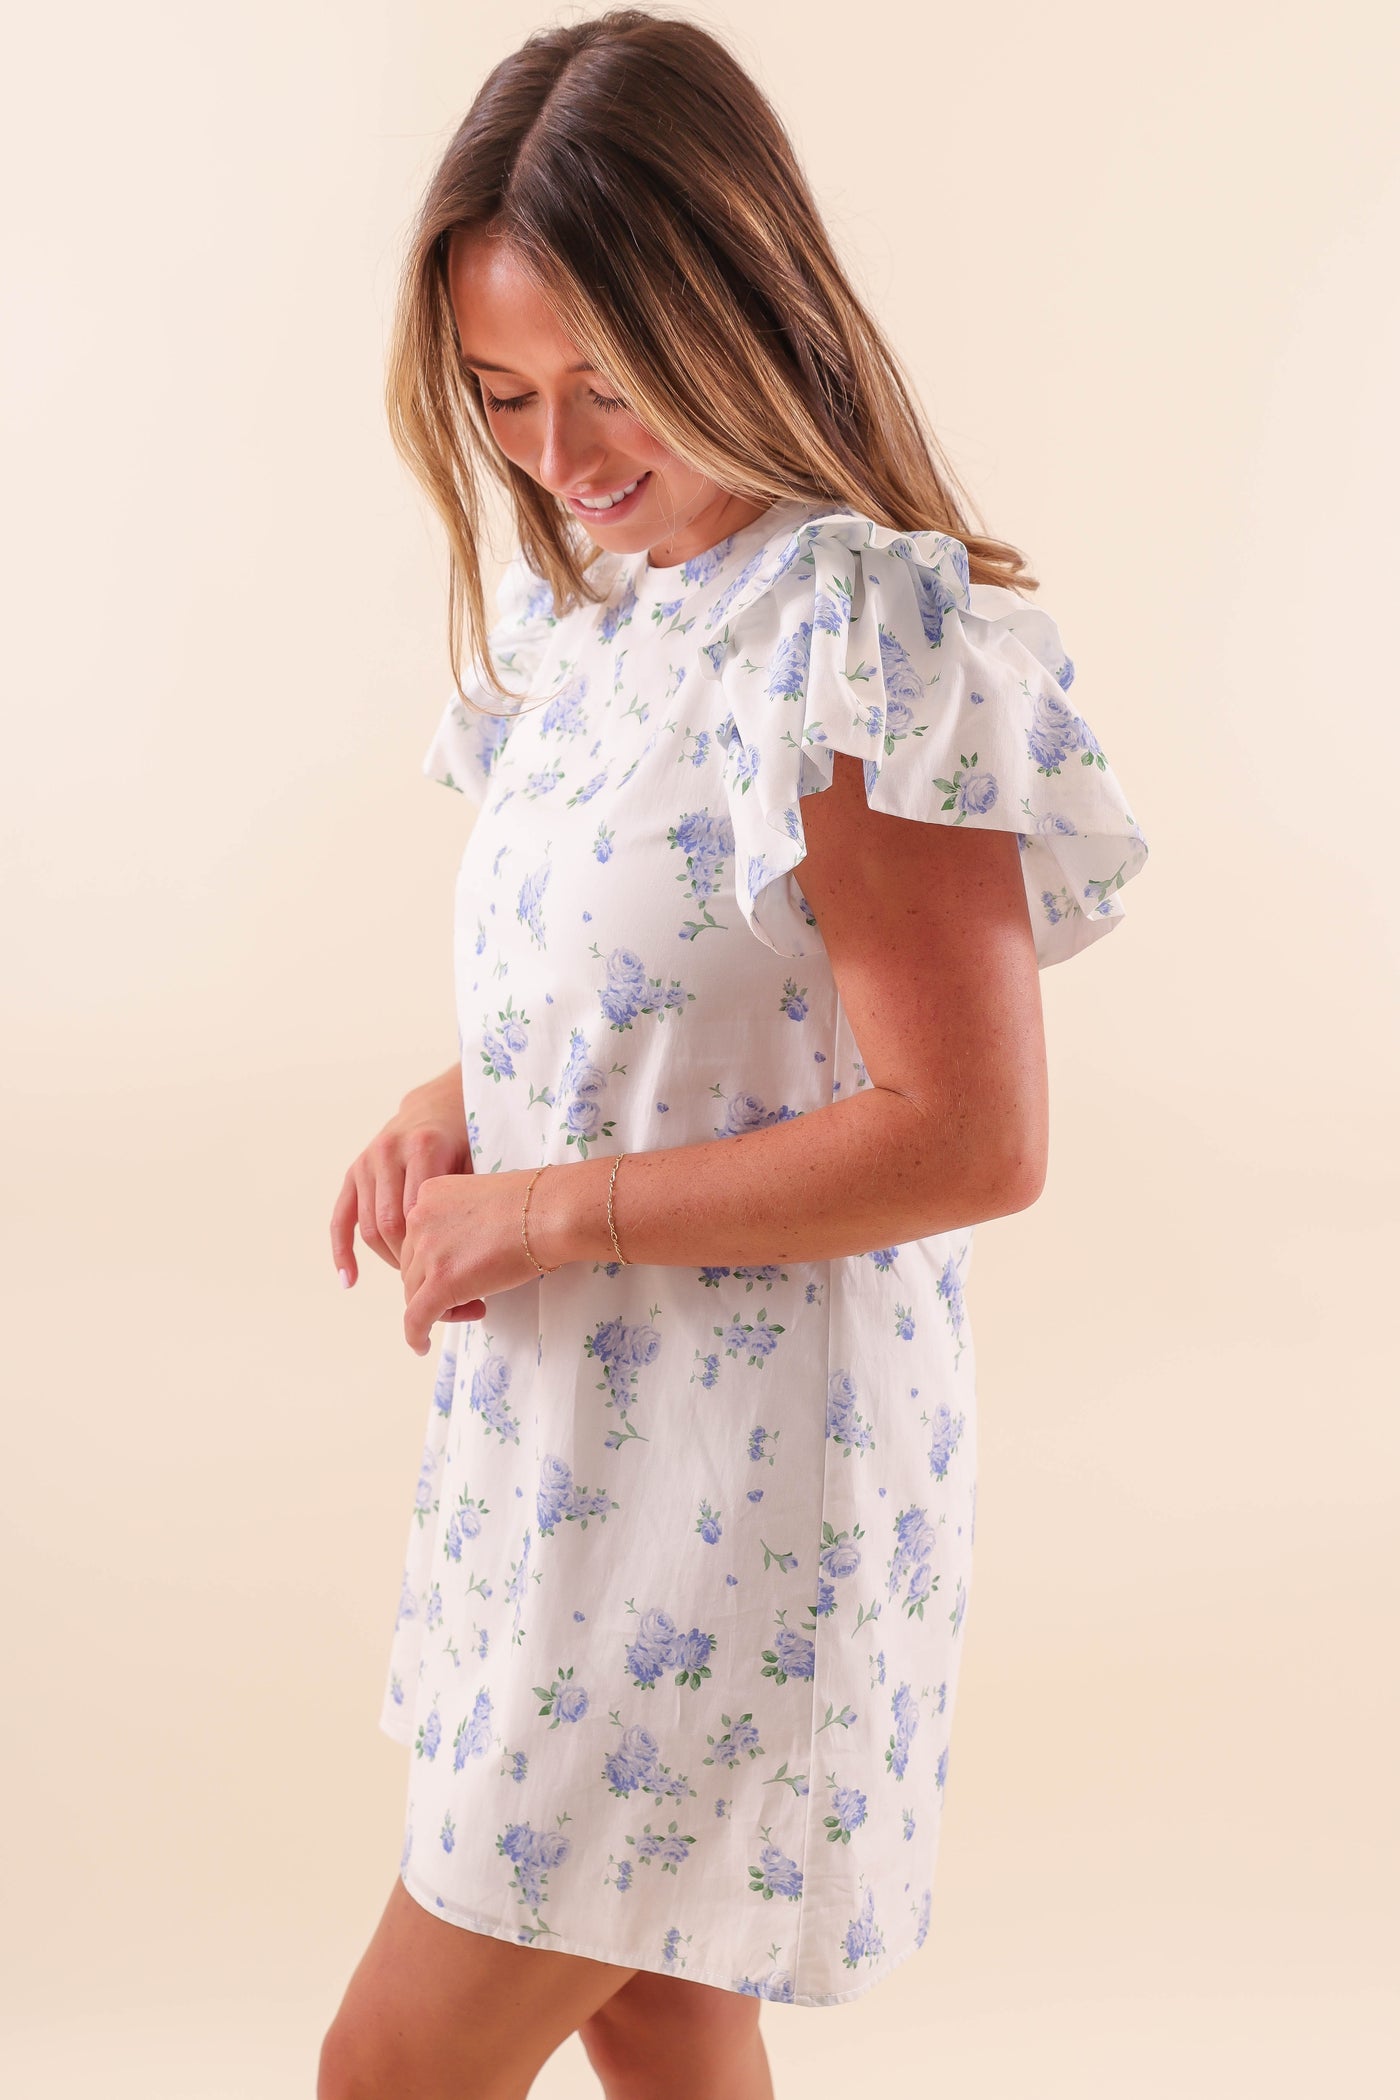 White Floral Shift Dress - Floral Shift Dress with Ruffled Sleeves- TCEC Ruffle Dress